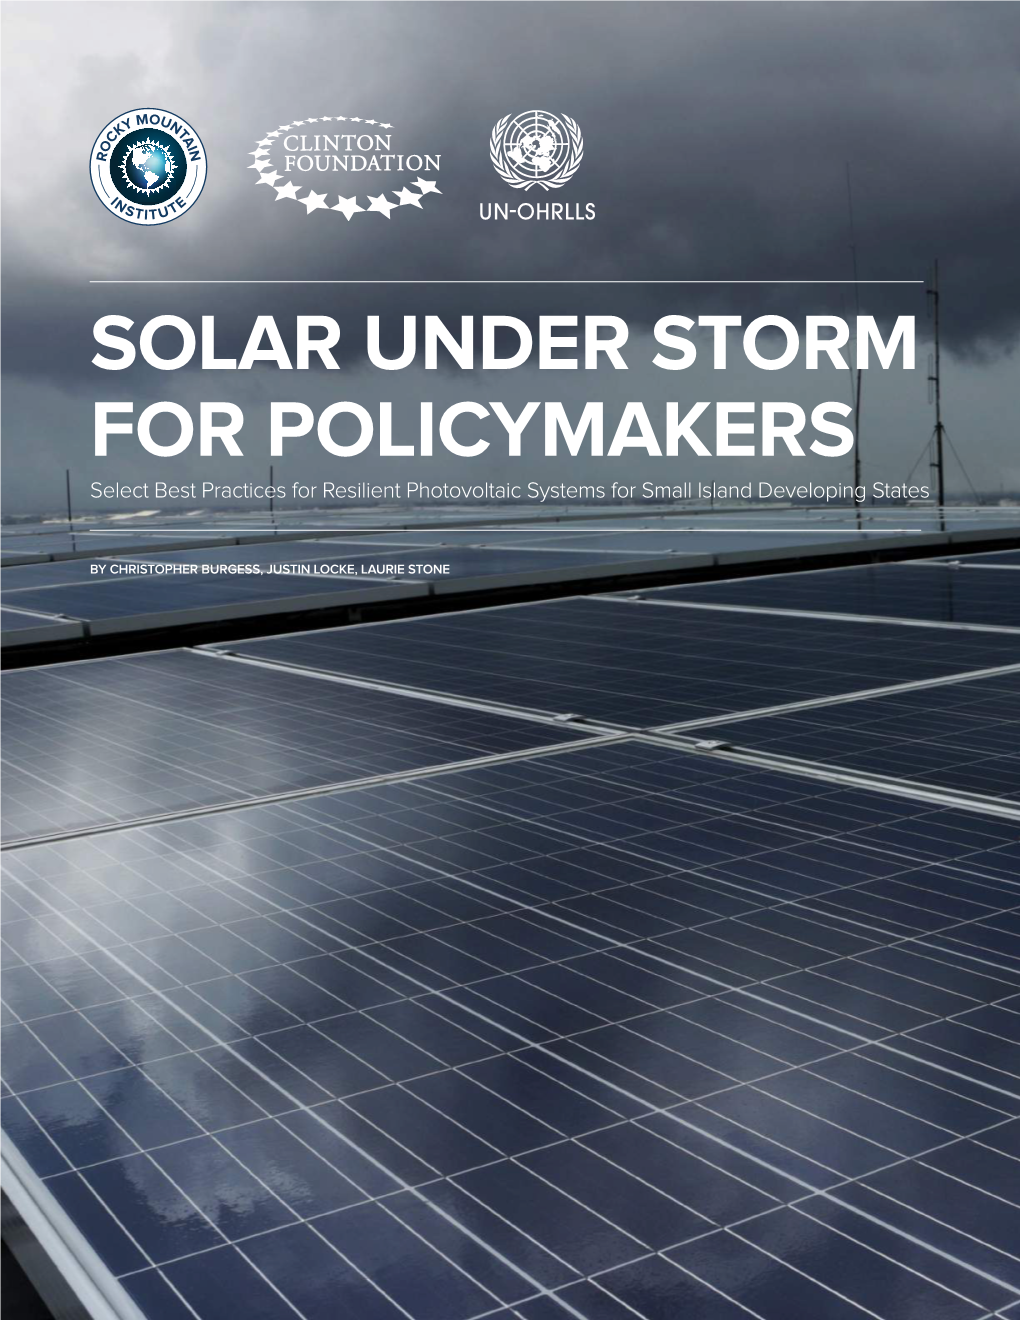 SOLAR UNDER STORM for POLICYMAKERS Select Best Practices for Resilient Photovoltaic Systems for Small Island Developing States